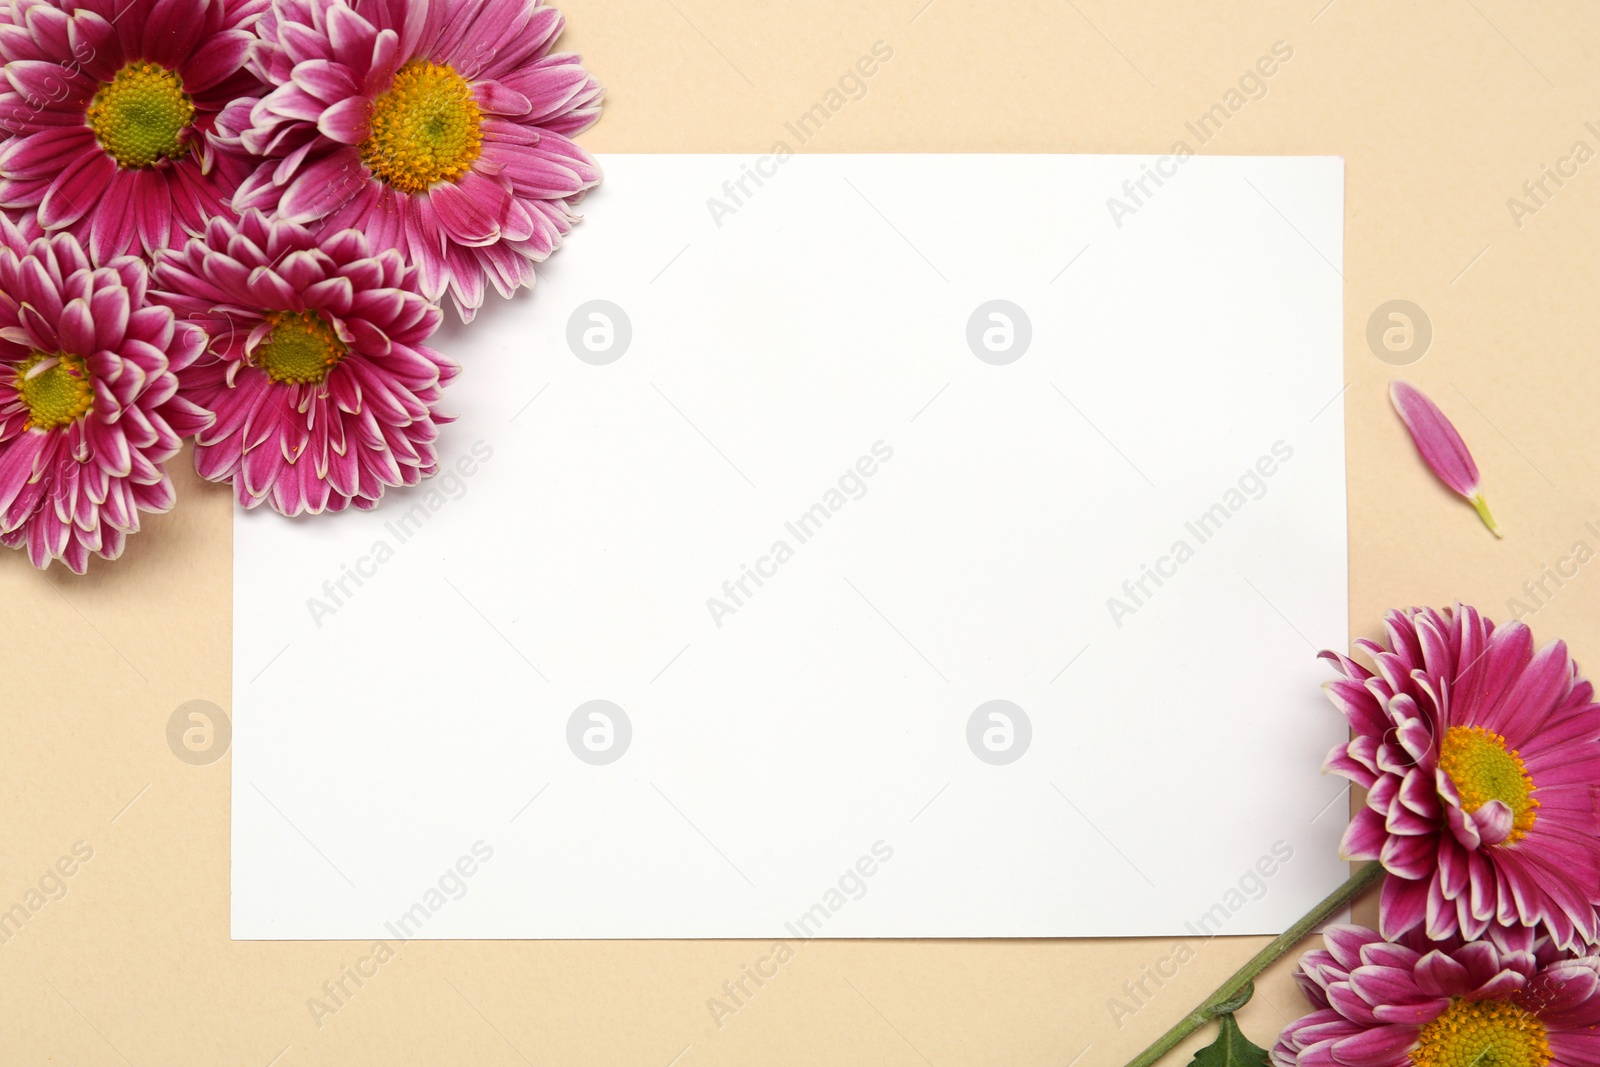 Photo of Beautiful chrysanthemums and blank card on beige background, flat lay. Space for text